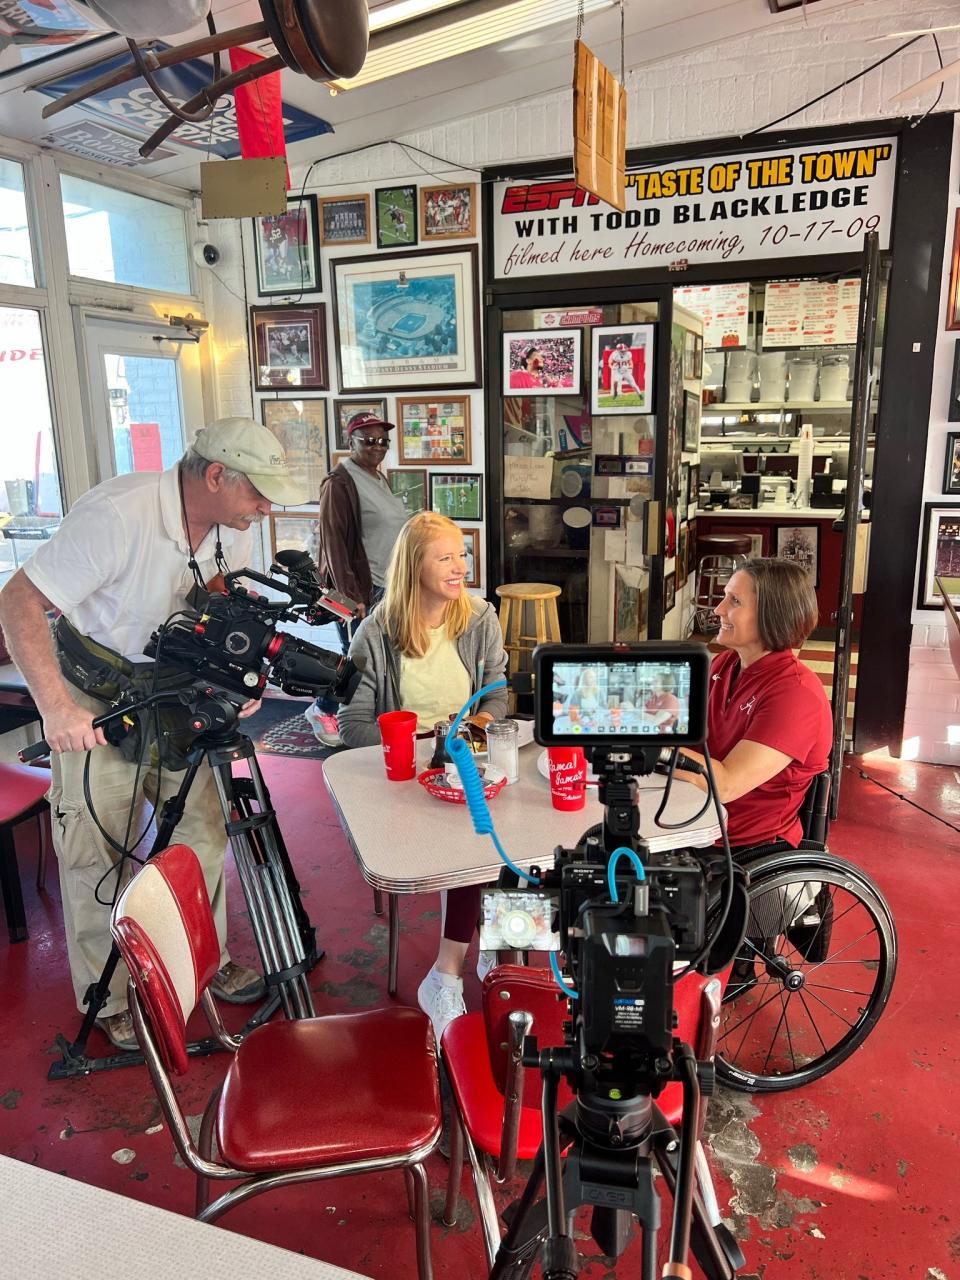 In this behind-the-scenes photo, "Travels with Darley" host Darley Newman interviews Margaret Stran, of the University of Alabama adapted athletics program, at Rama Jama's.